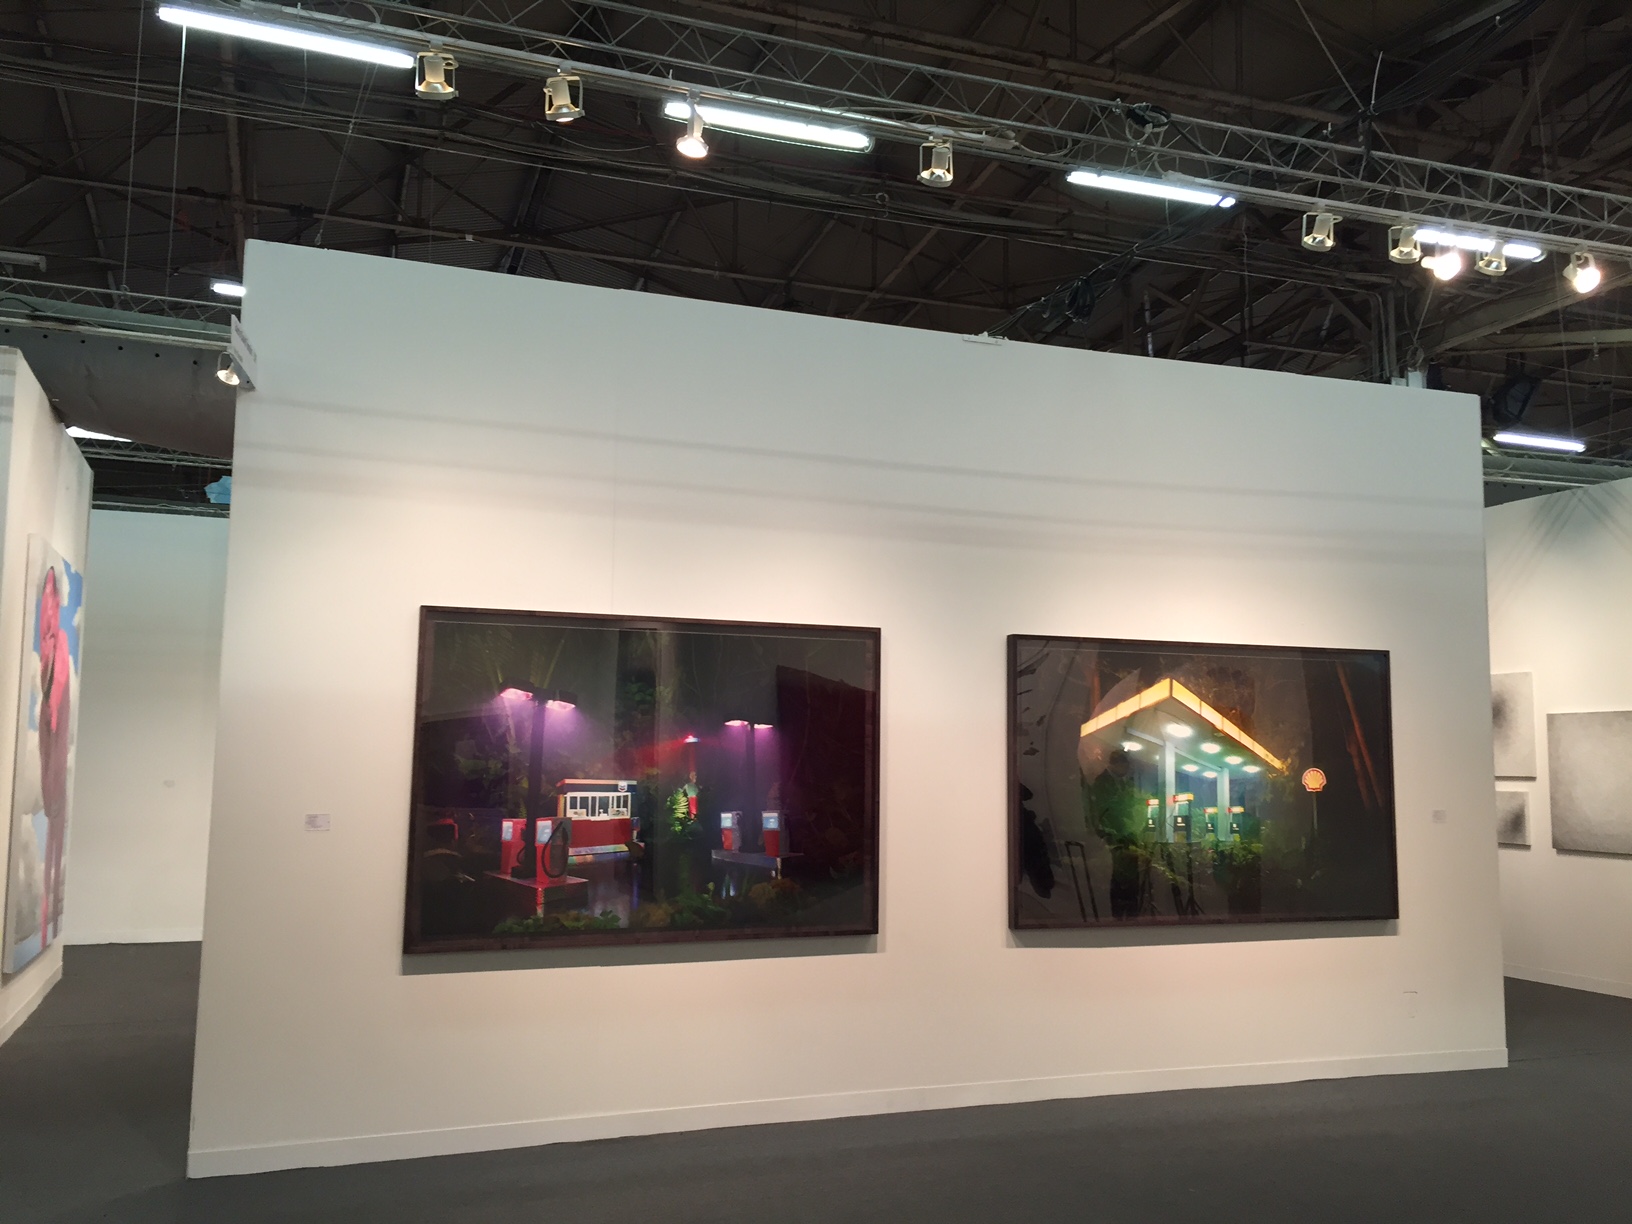 David LaChapelle | THE ARMORY SHOW, GALERIE DANIEL TEMPLON, New York City, USA, March 5 - March 8, 2015 | 3